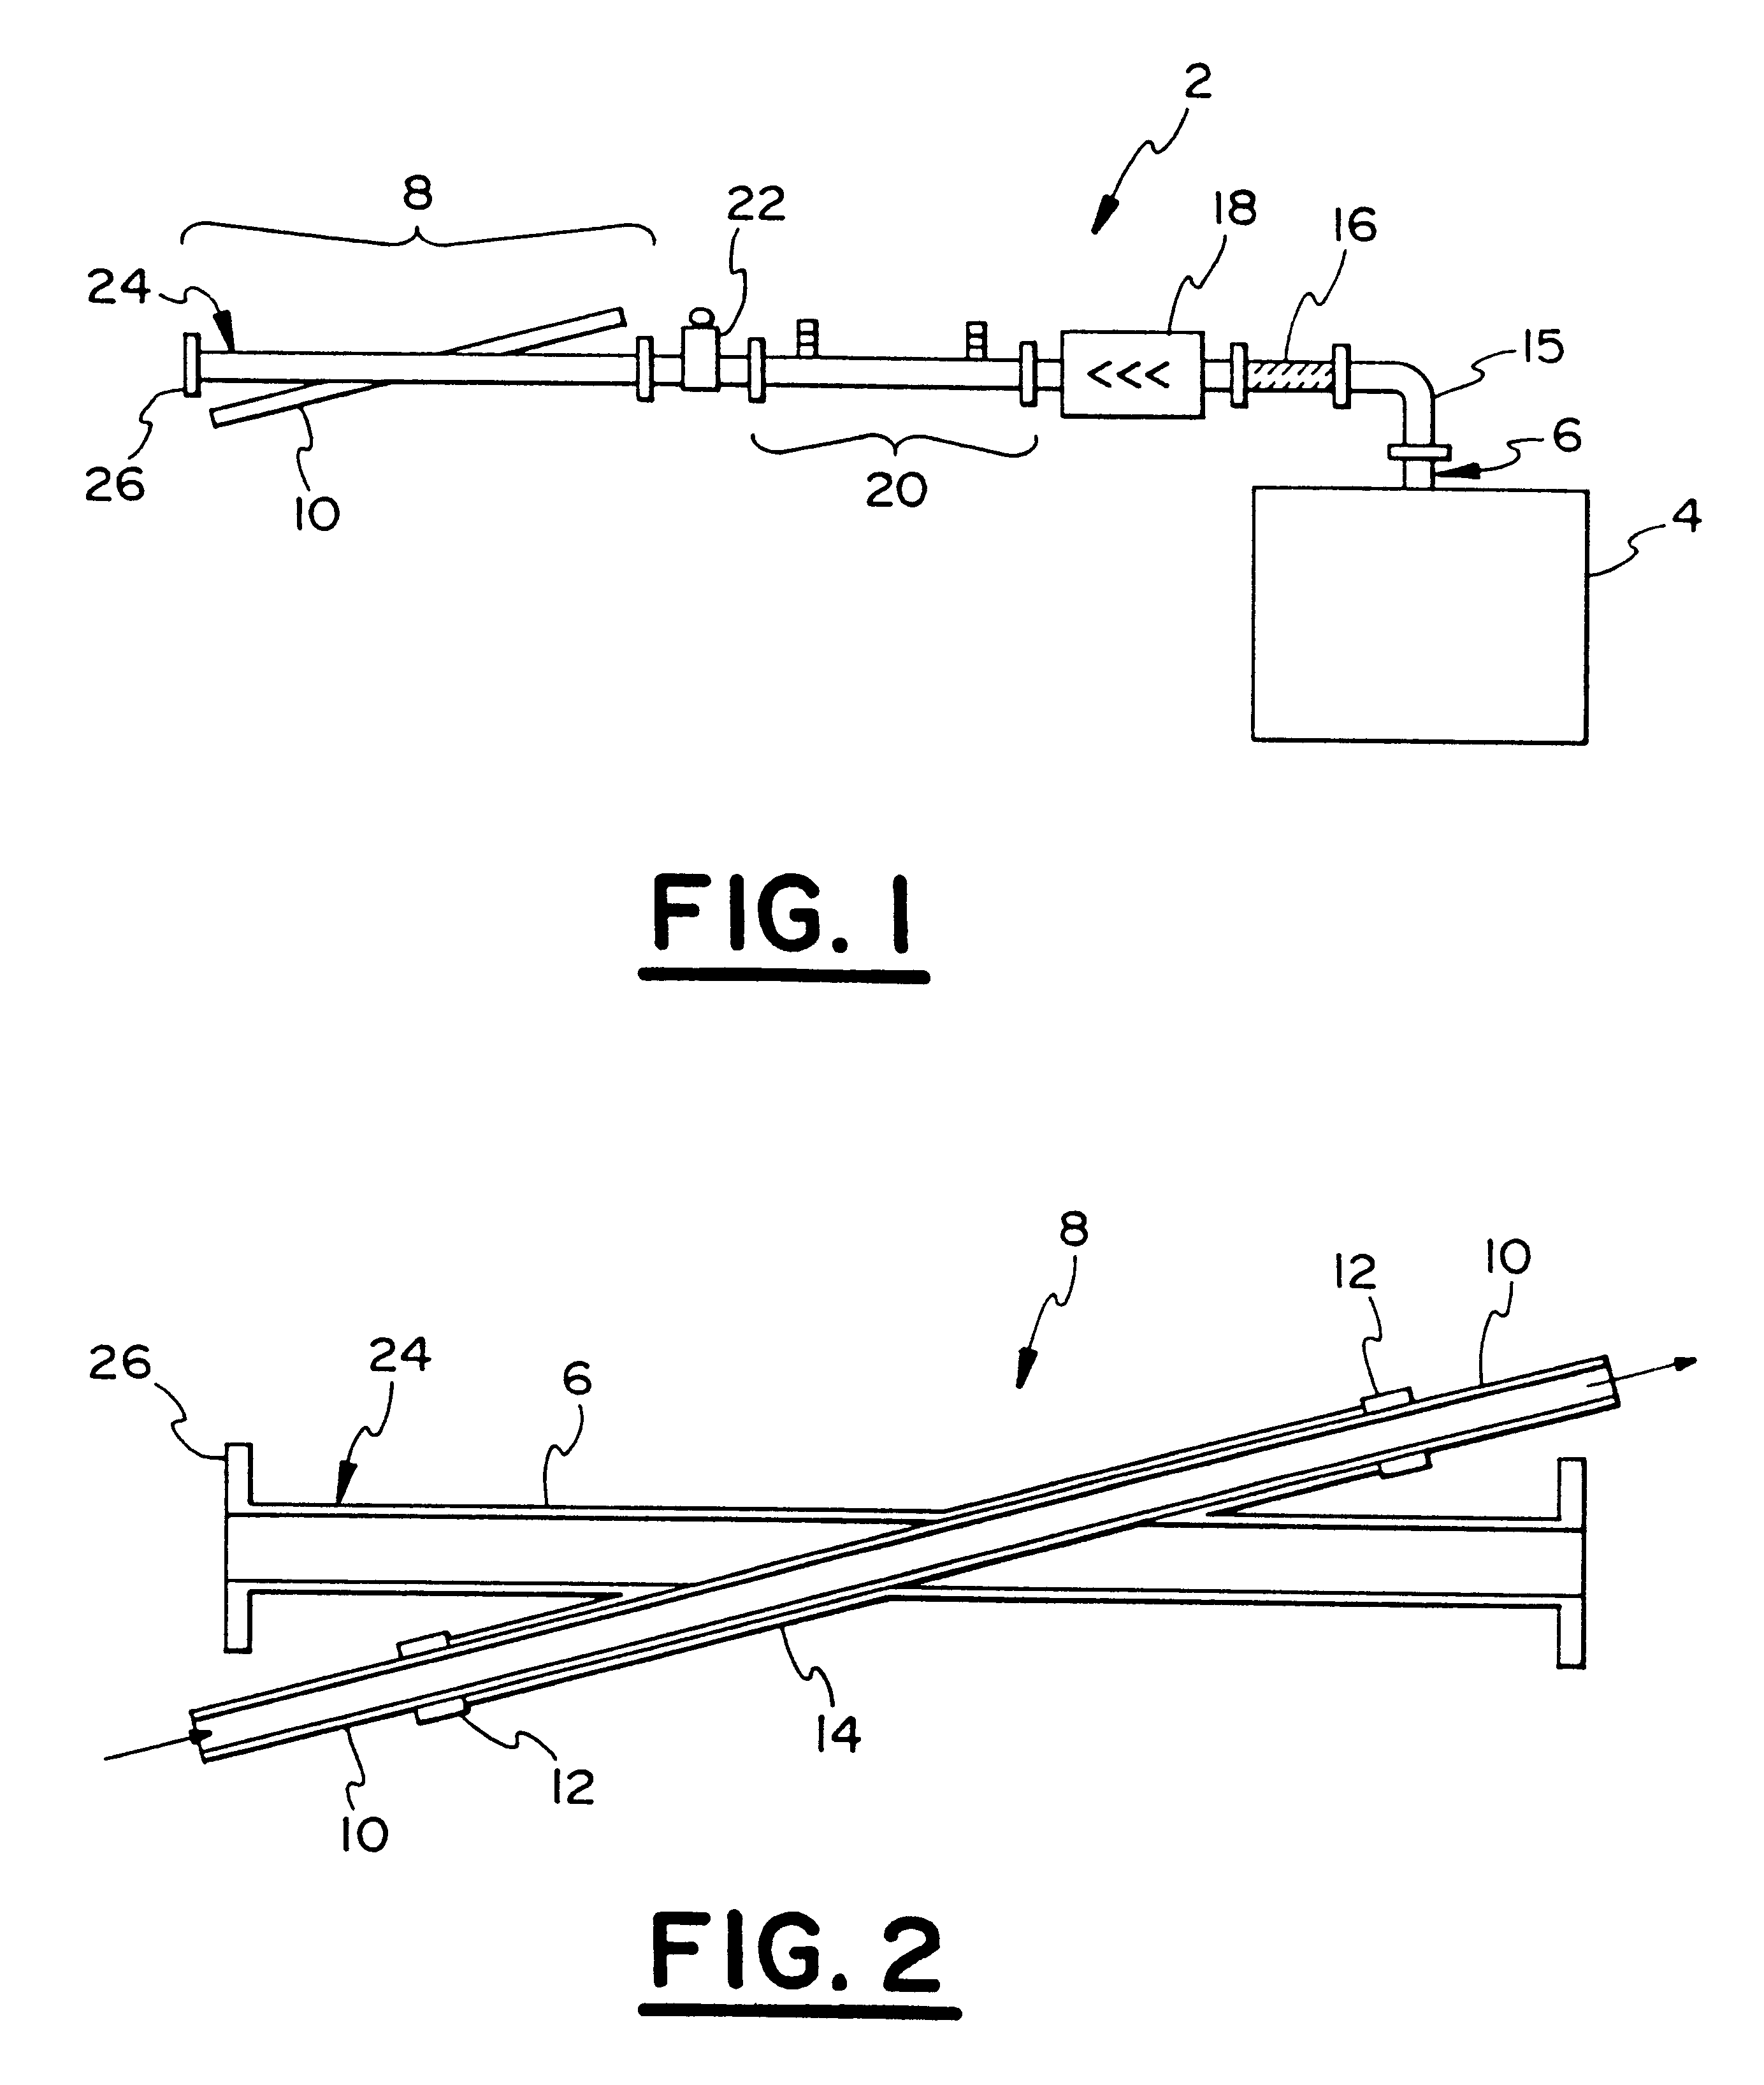 Method for generating a highly reactive plasma for exhaust gas aftertreatment and enhanced catalyst reactivity